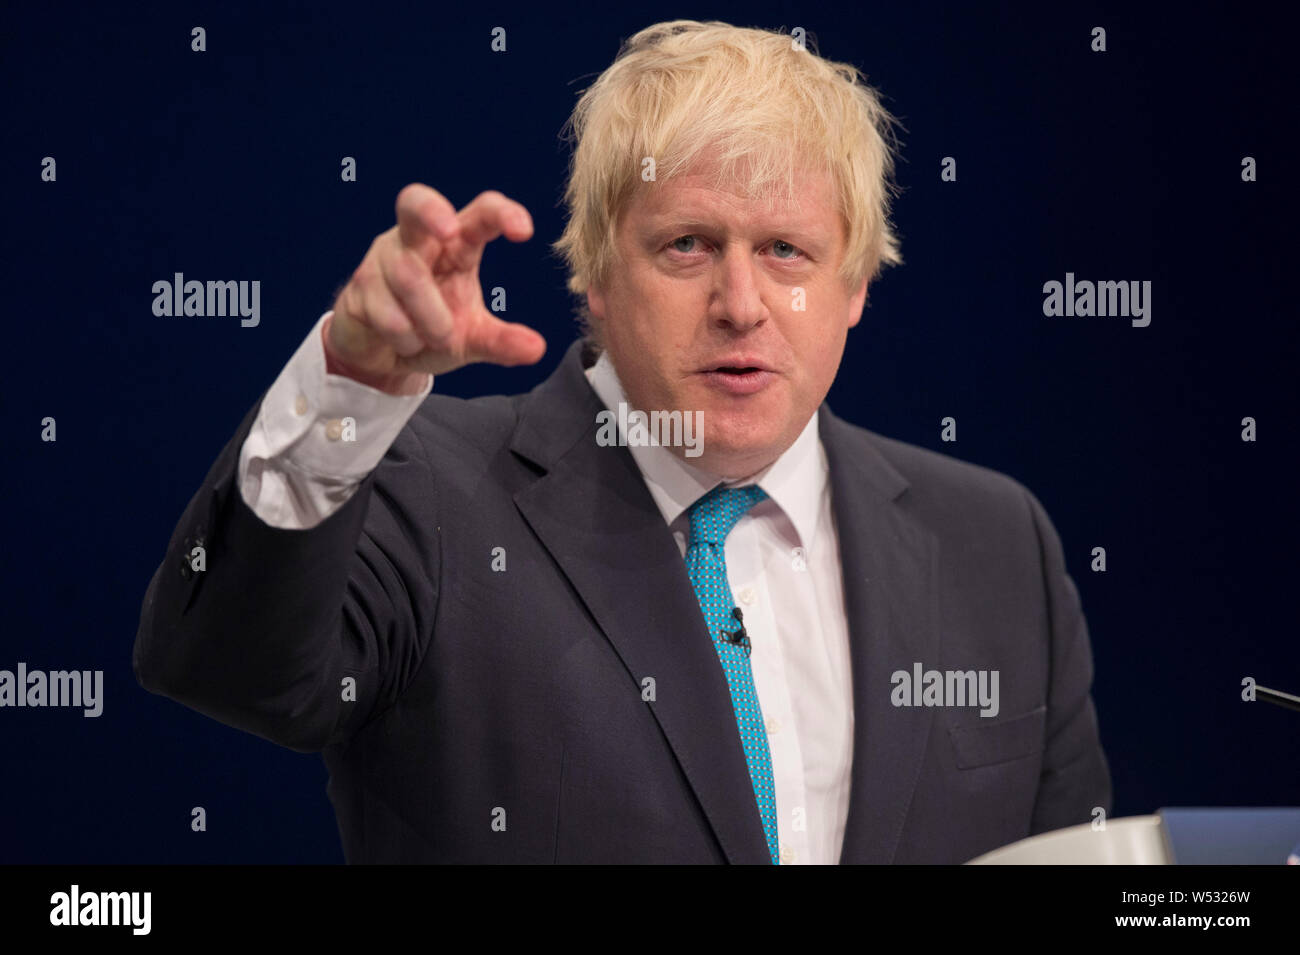 Boris Johnson makes his speech at Tory Conference, Tuesday Manchester 2015 Stock Photo